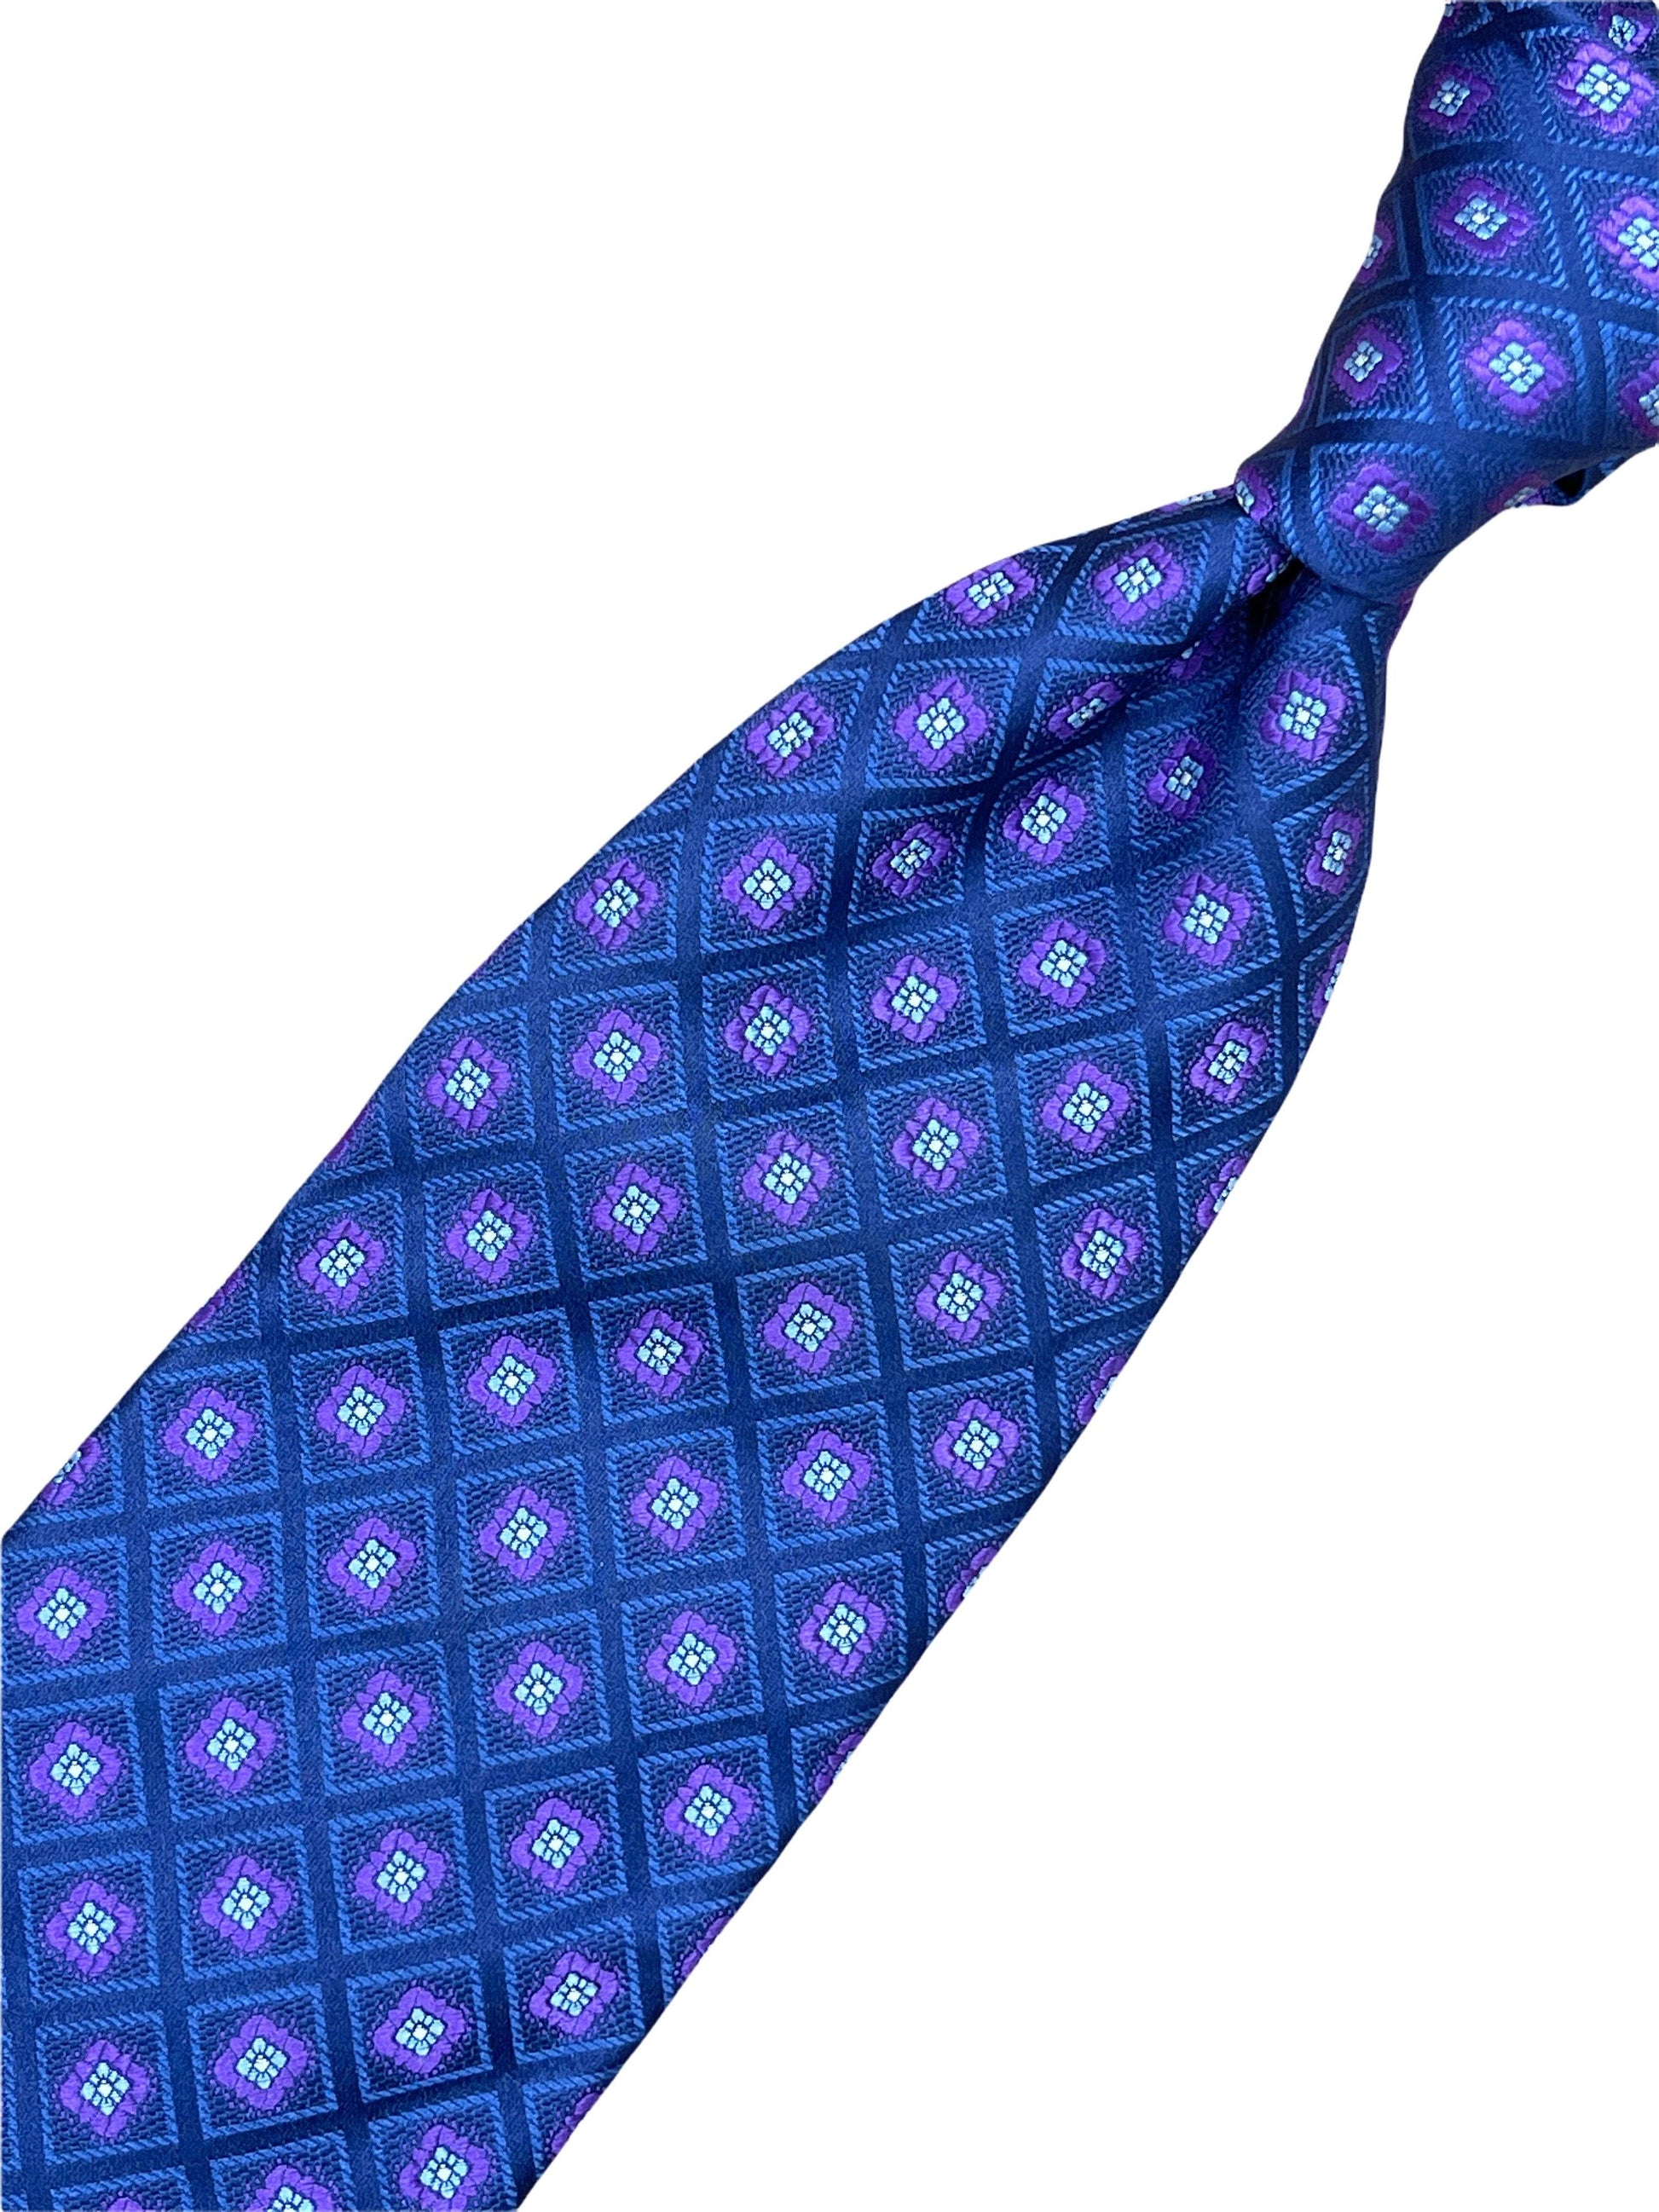 Canali Navy with Purple floral 100% silk tie. Genuine Design luxury consignment